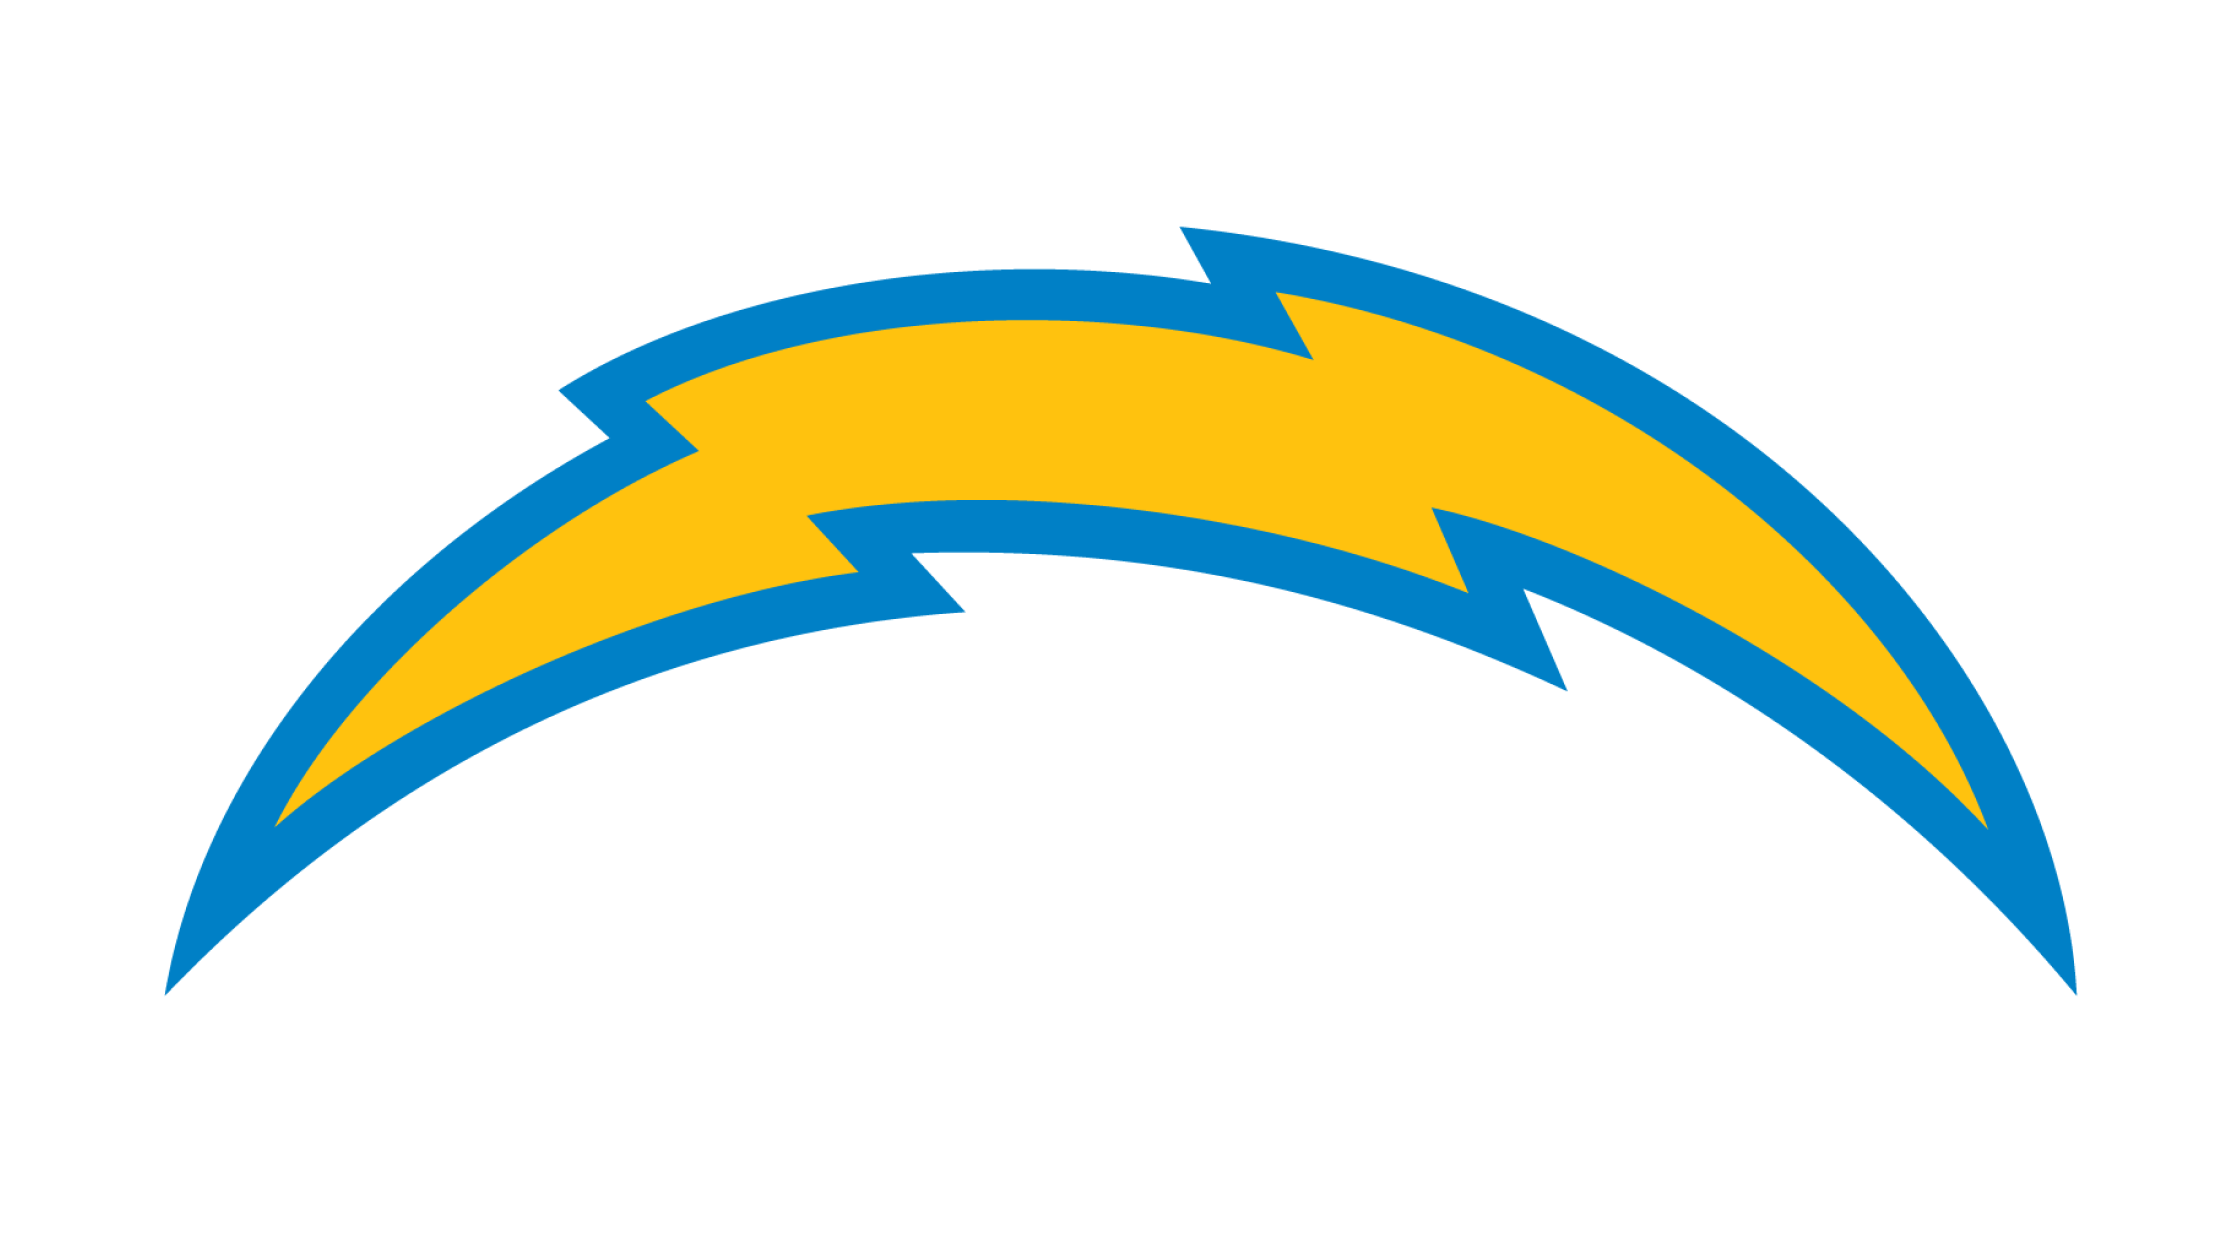 chargers madden 23 ratings